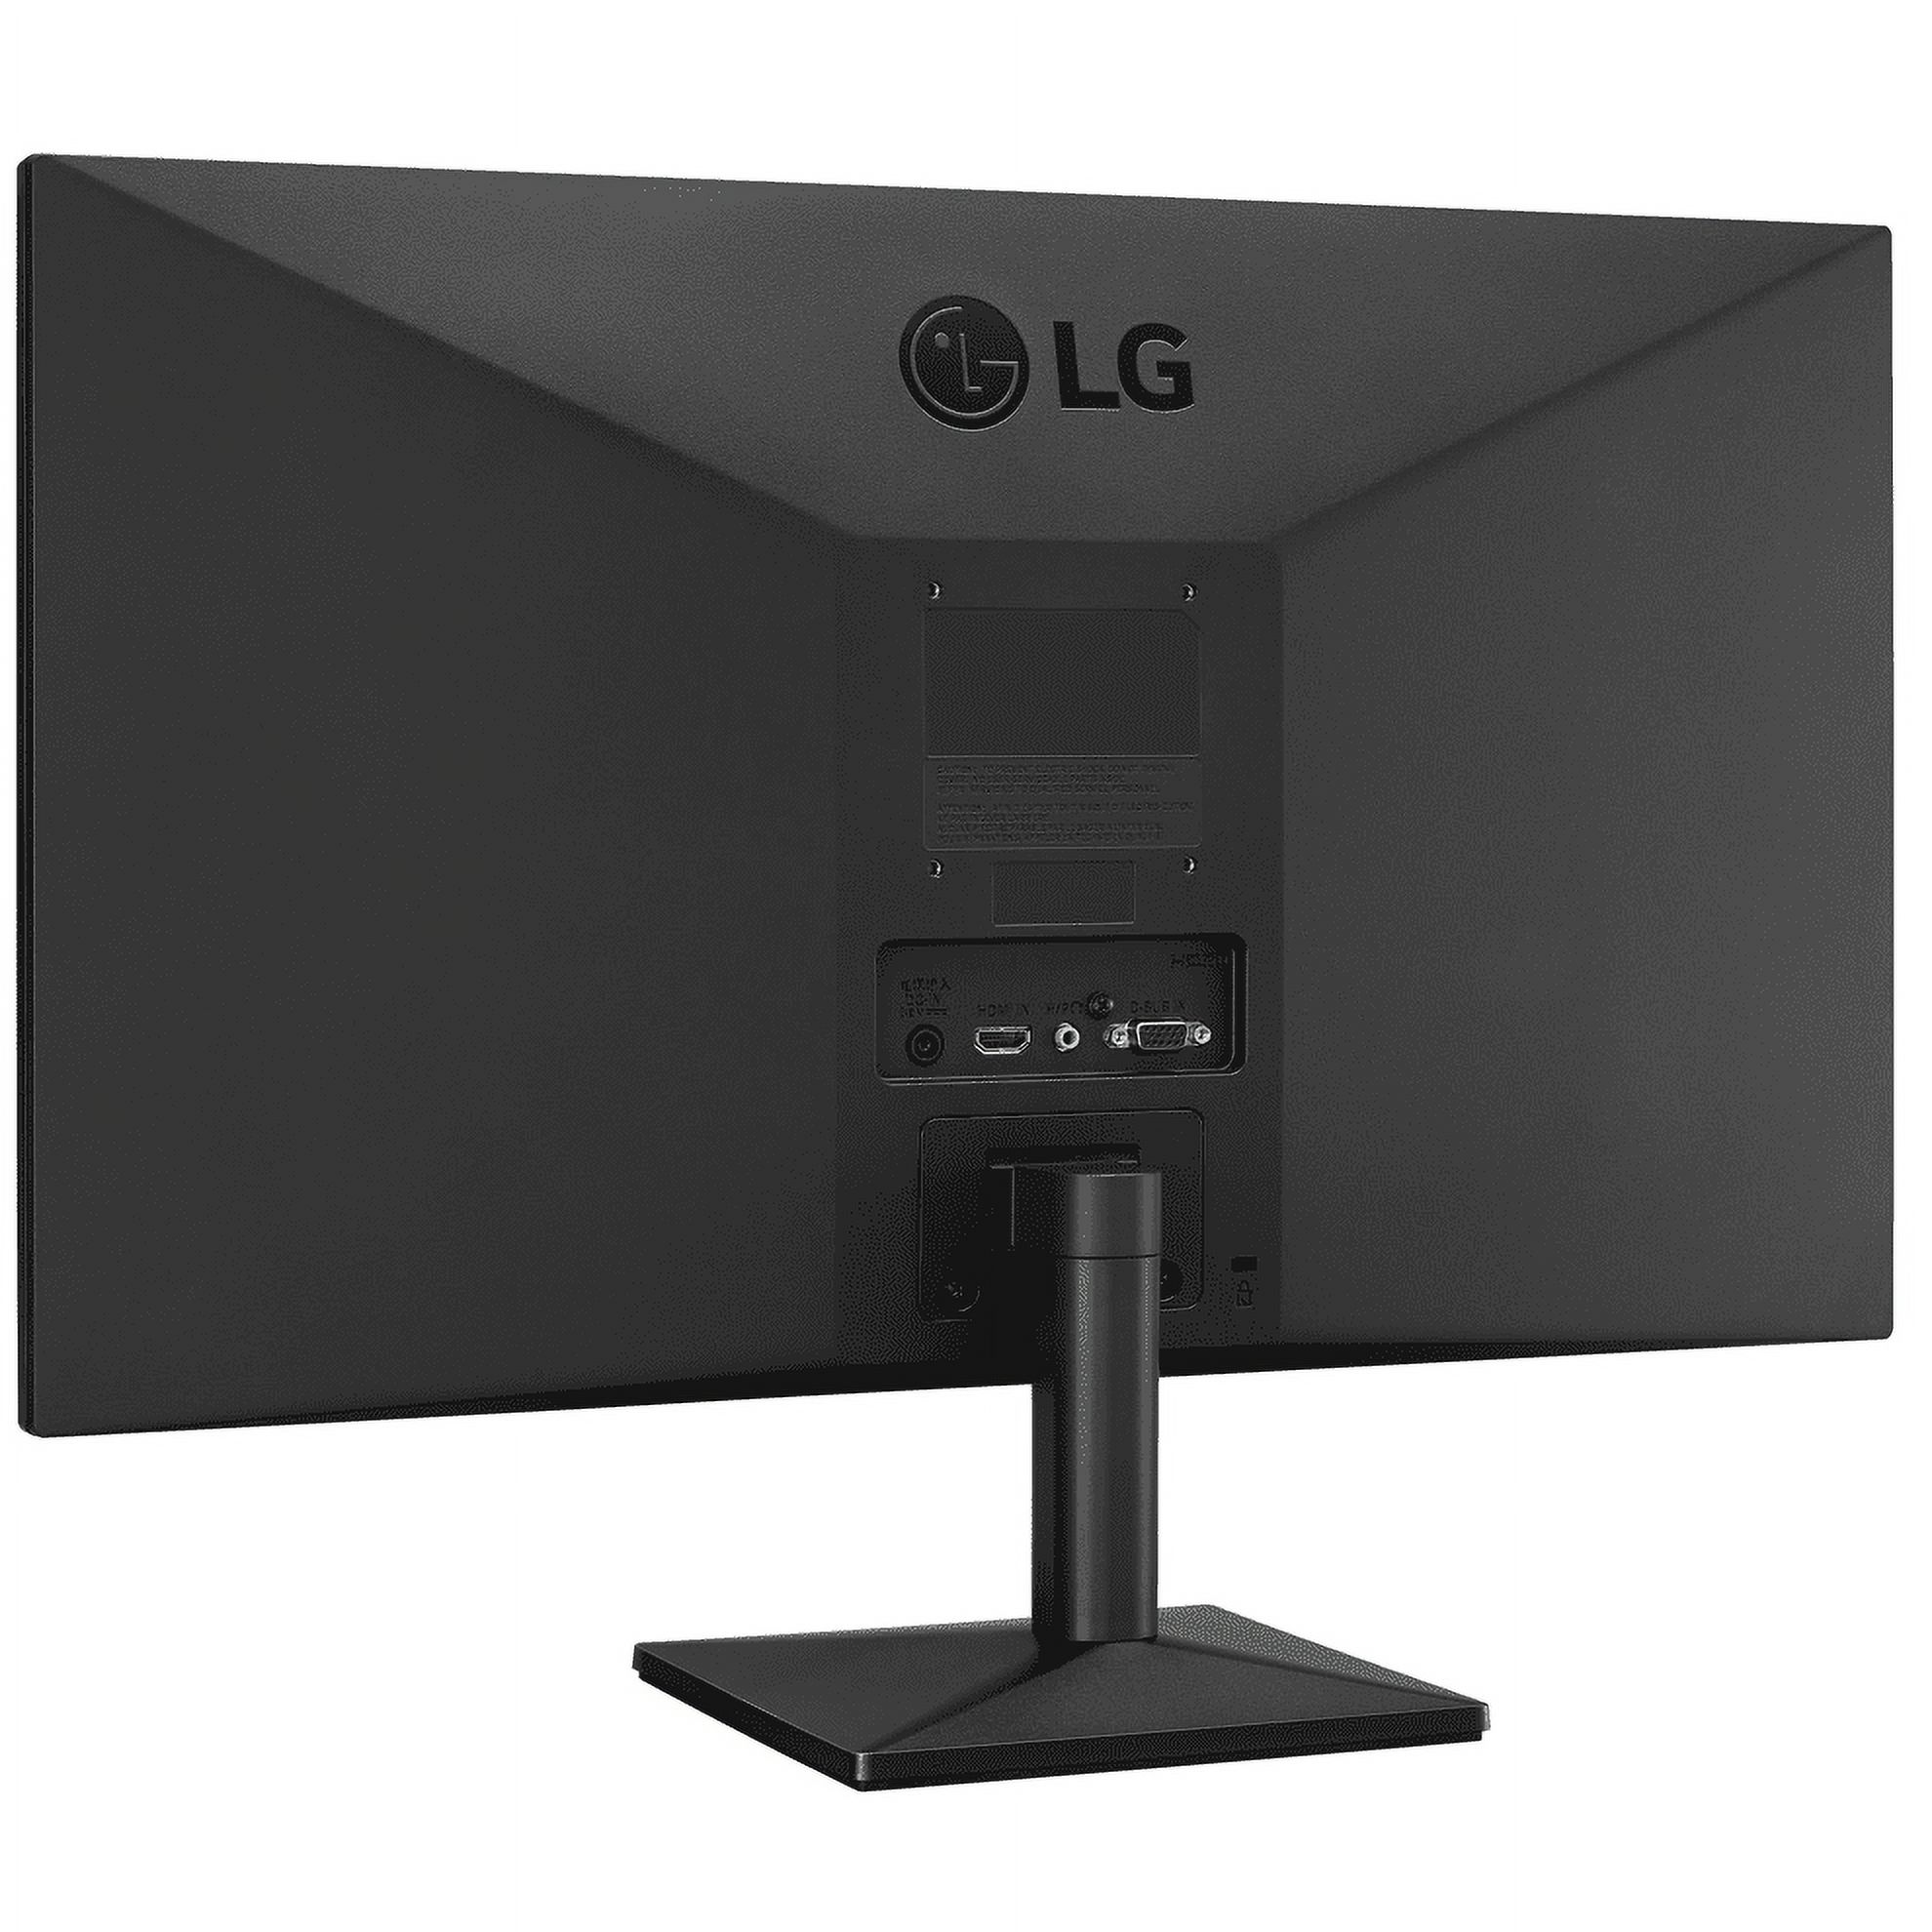 LG Electronics 24MK430H-B 24-inch Class IPS LED Monitor with AMD - image 5 of 9